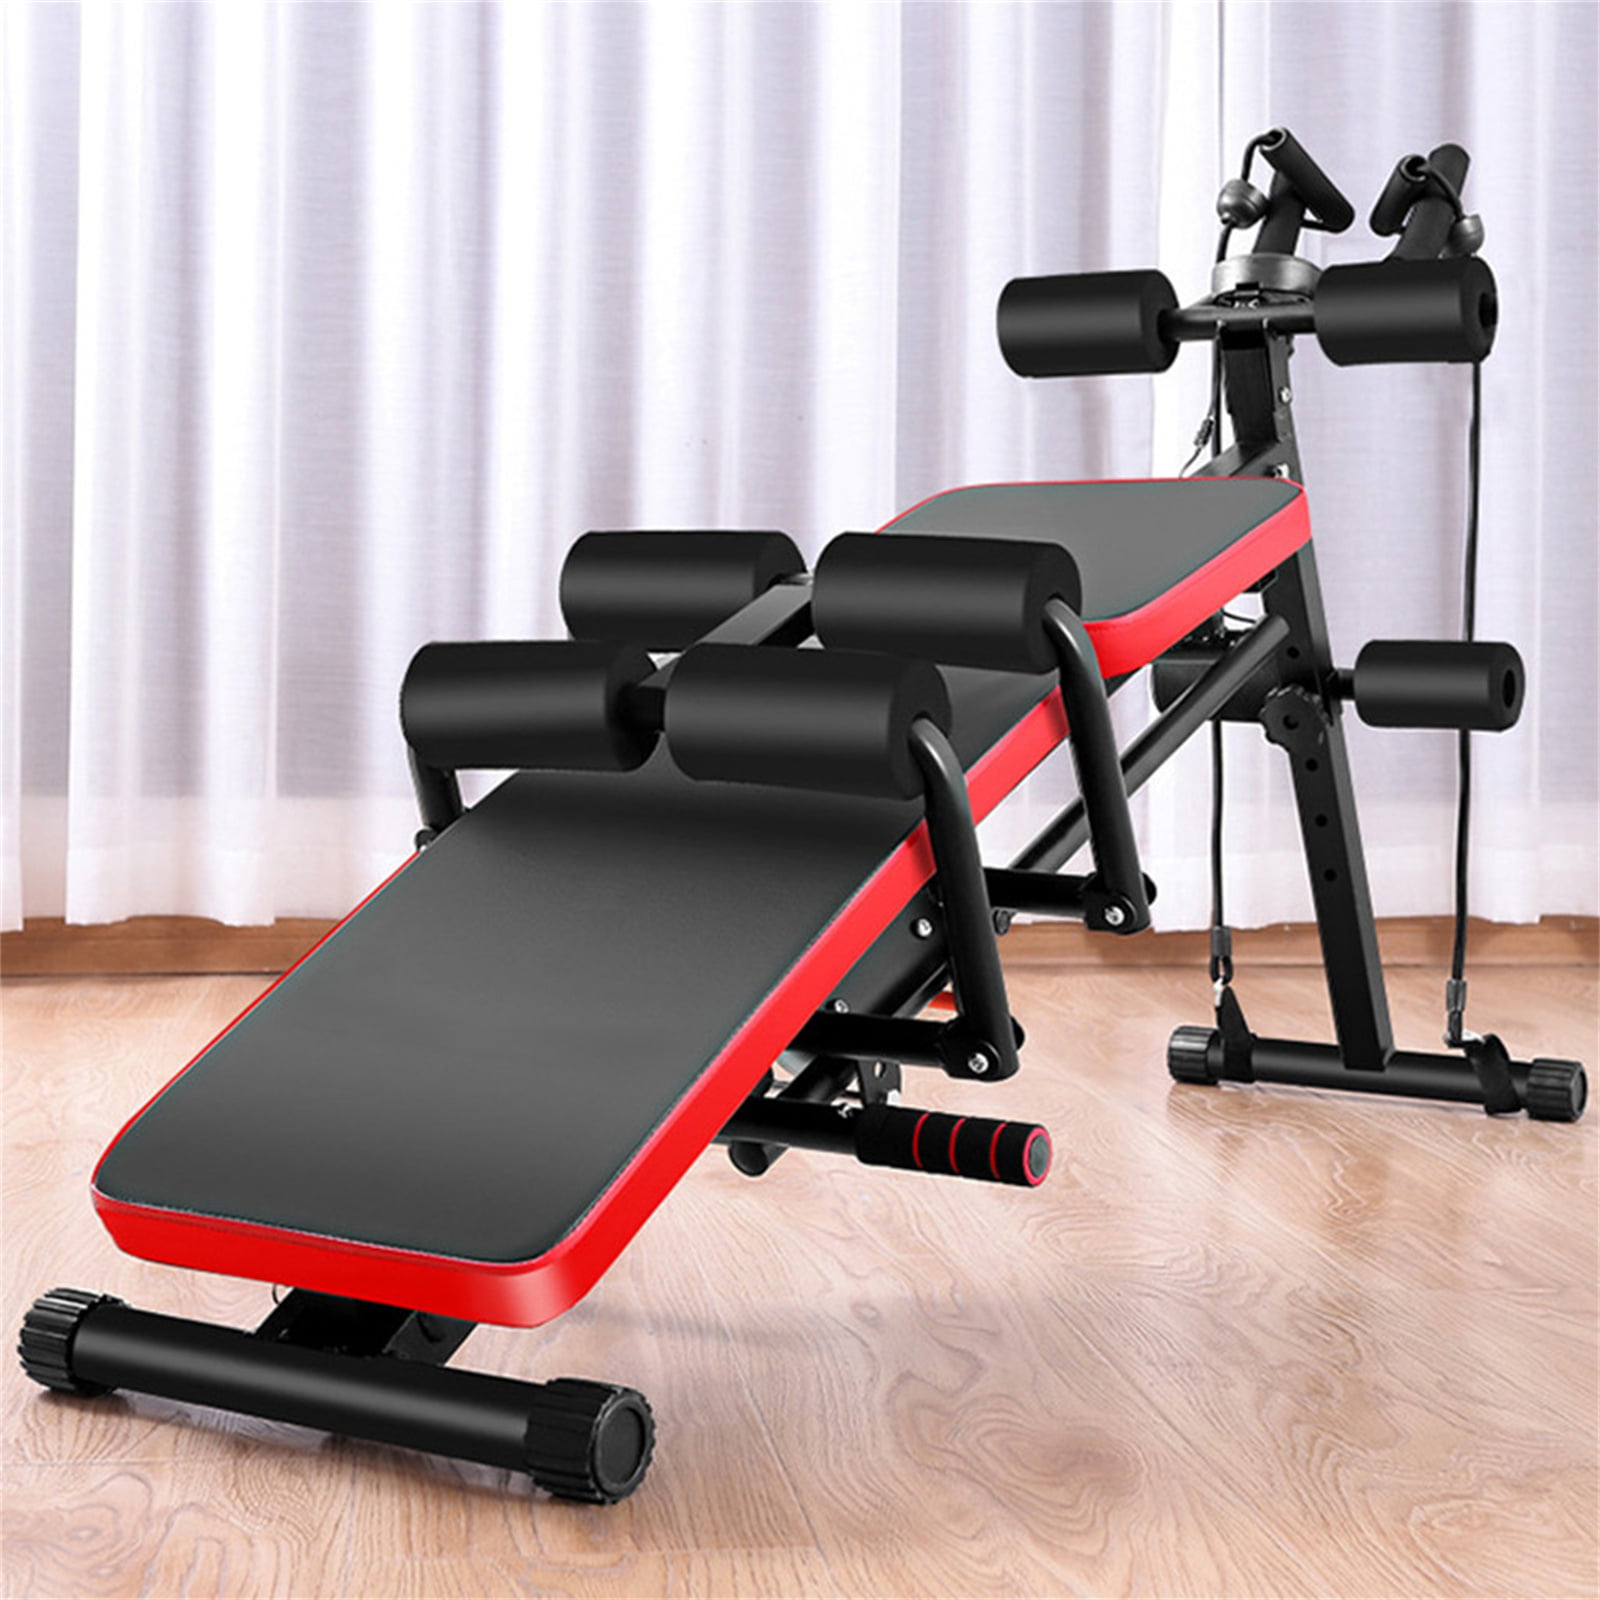 Foldable Sit up Bench Crunch Board Abdominal Fitness Home Gym Exercise Machine 